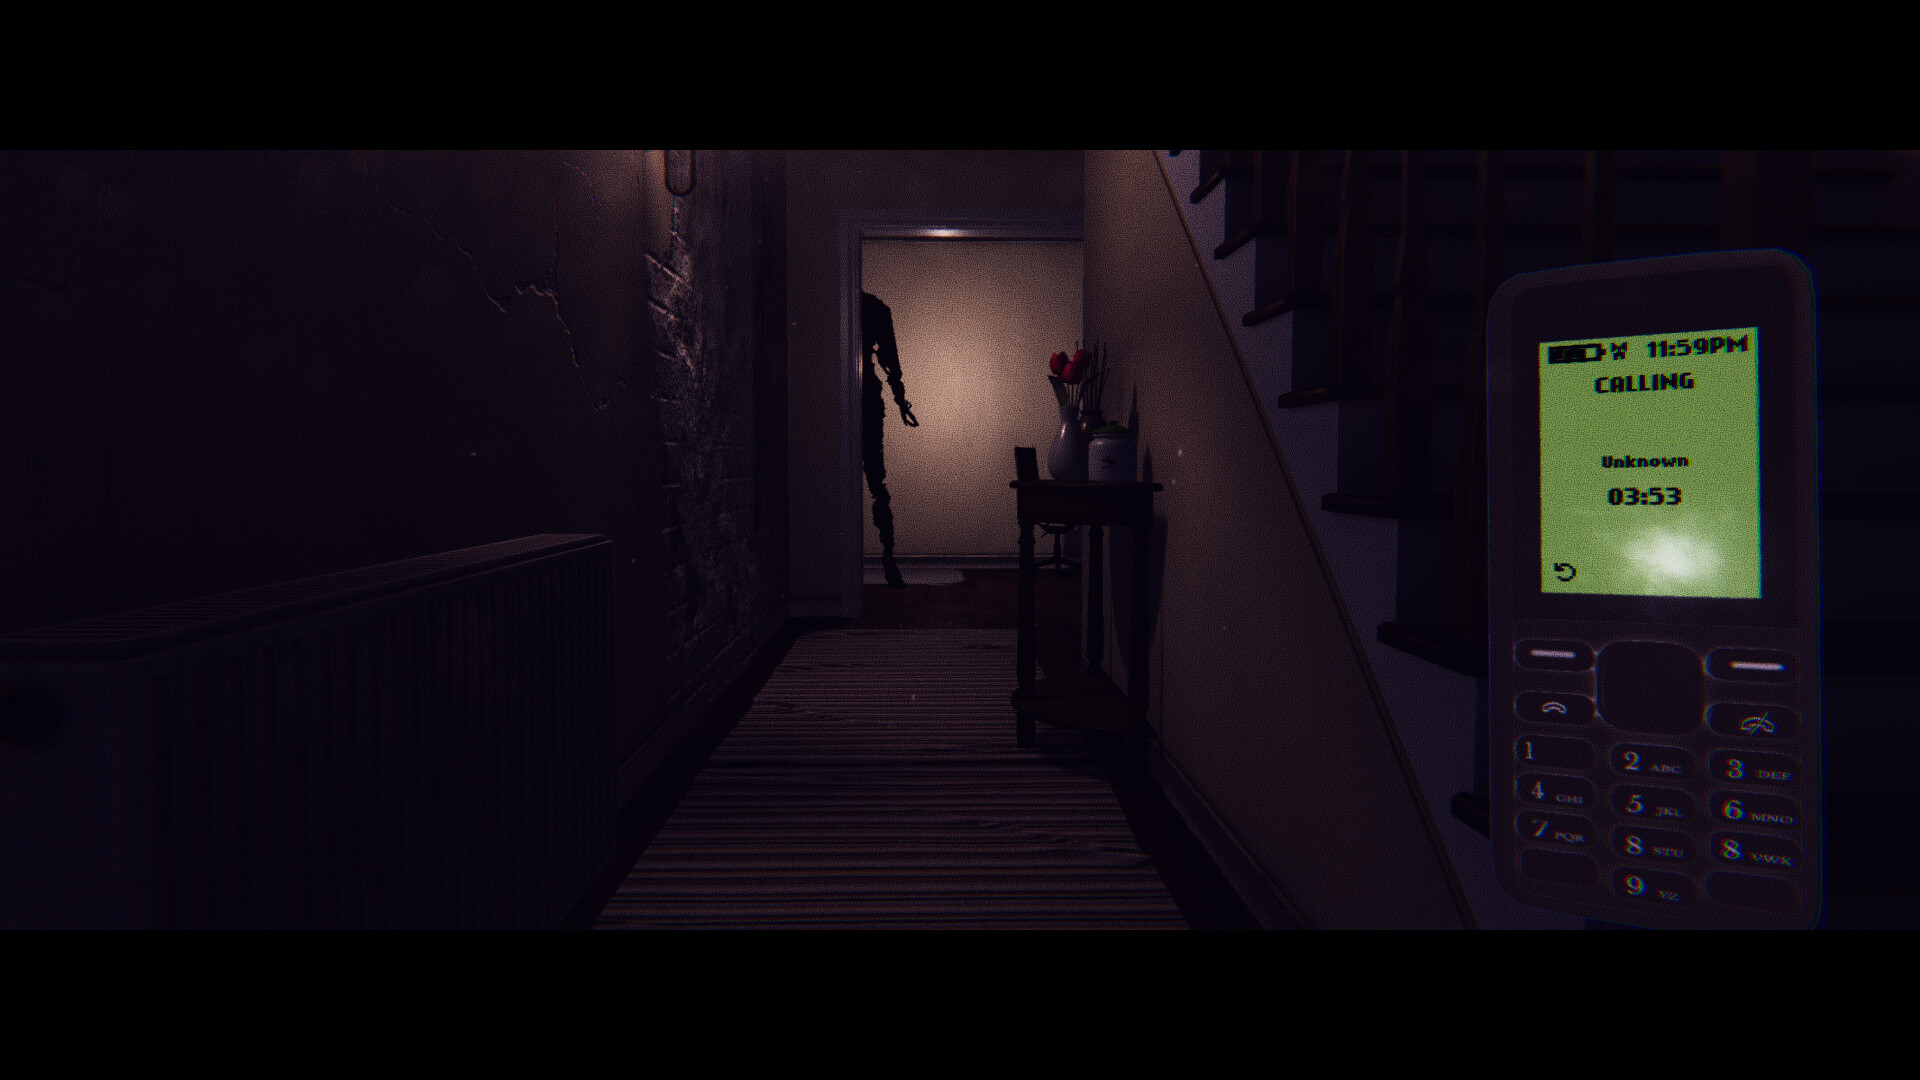 Without Windows and Doors: A Paranormal Investigators Story Featured Screenshot #1